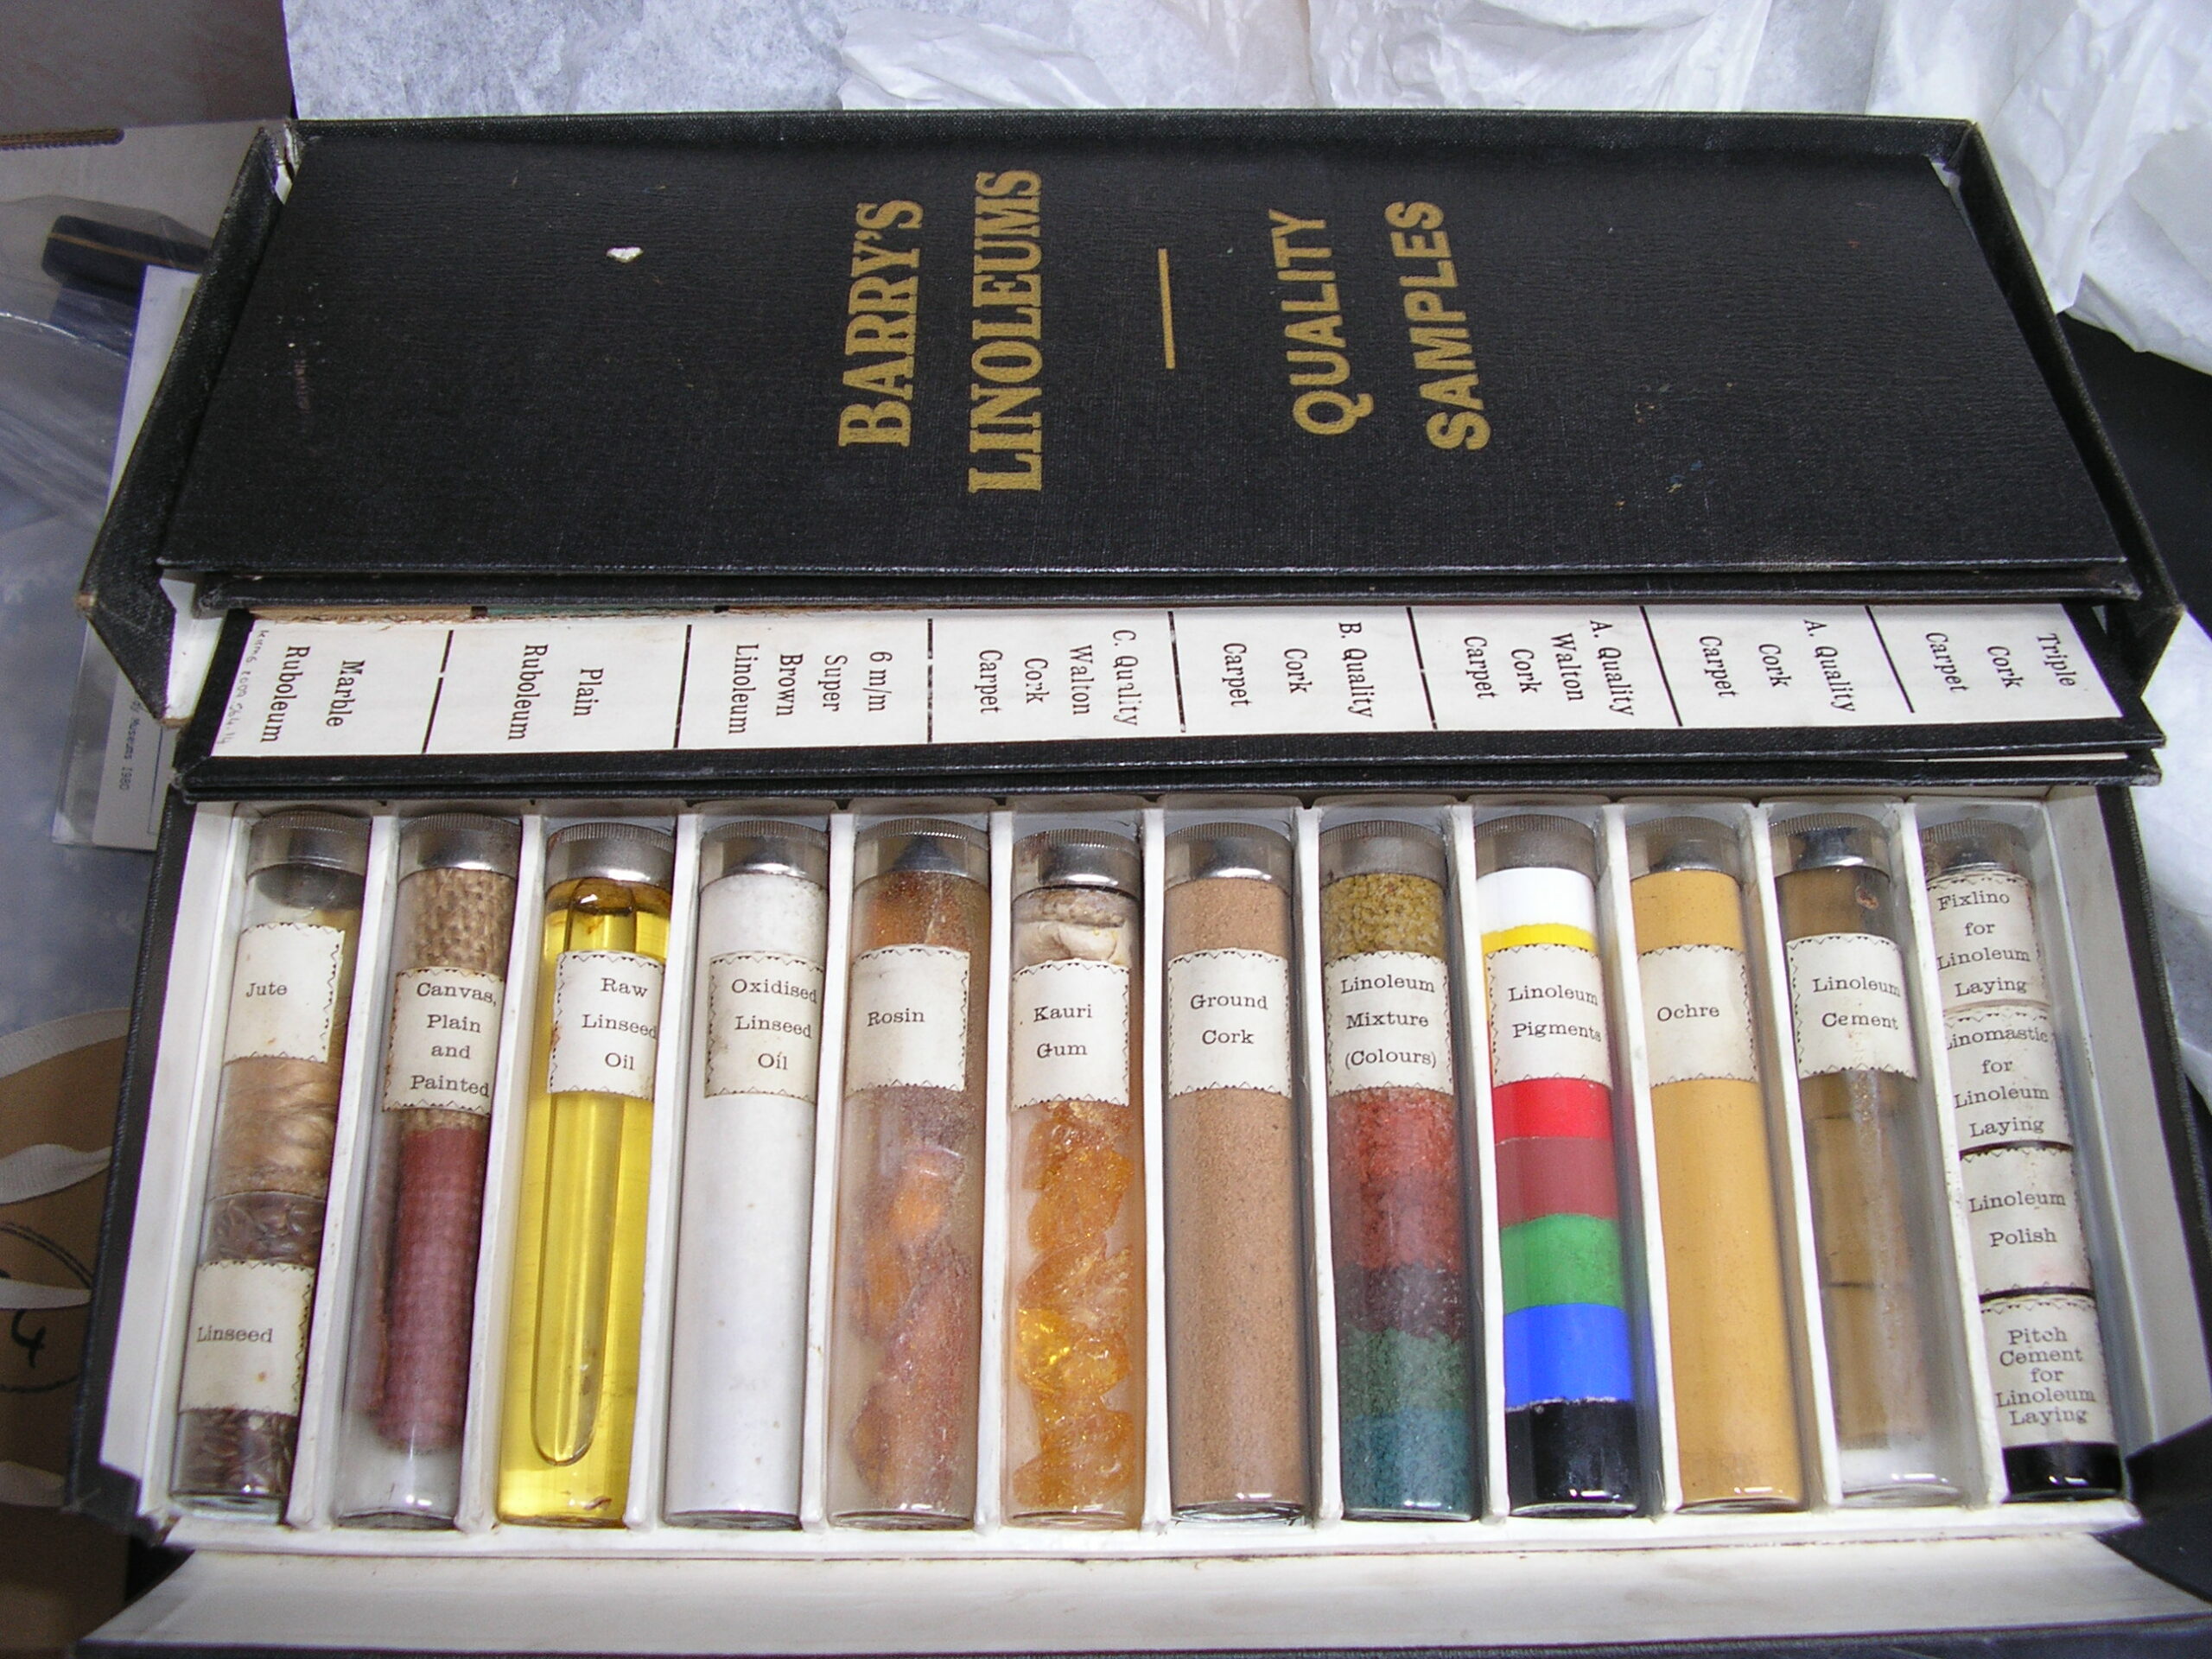 A black case containing several glass vials. Each vial is filled with a different colour substance, and is marked with a white label which describes the contents.